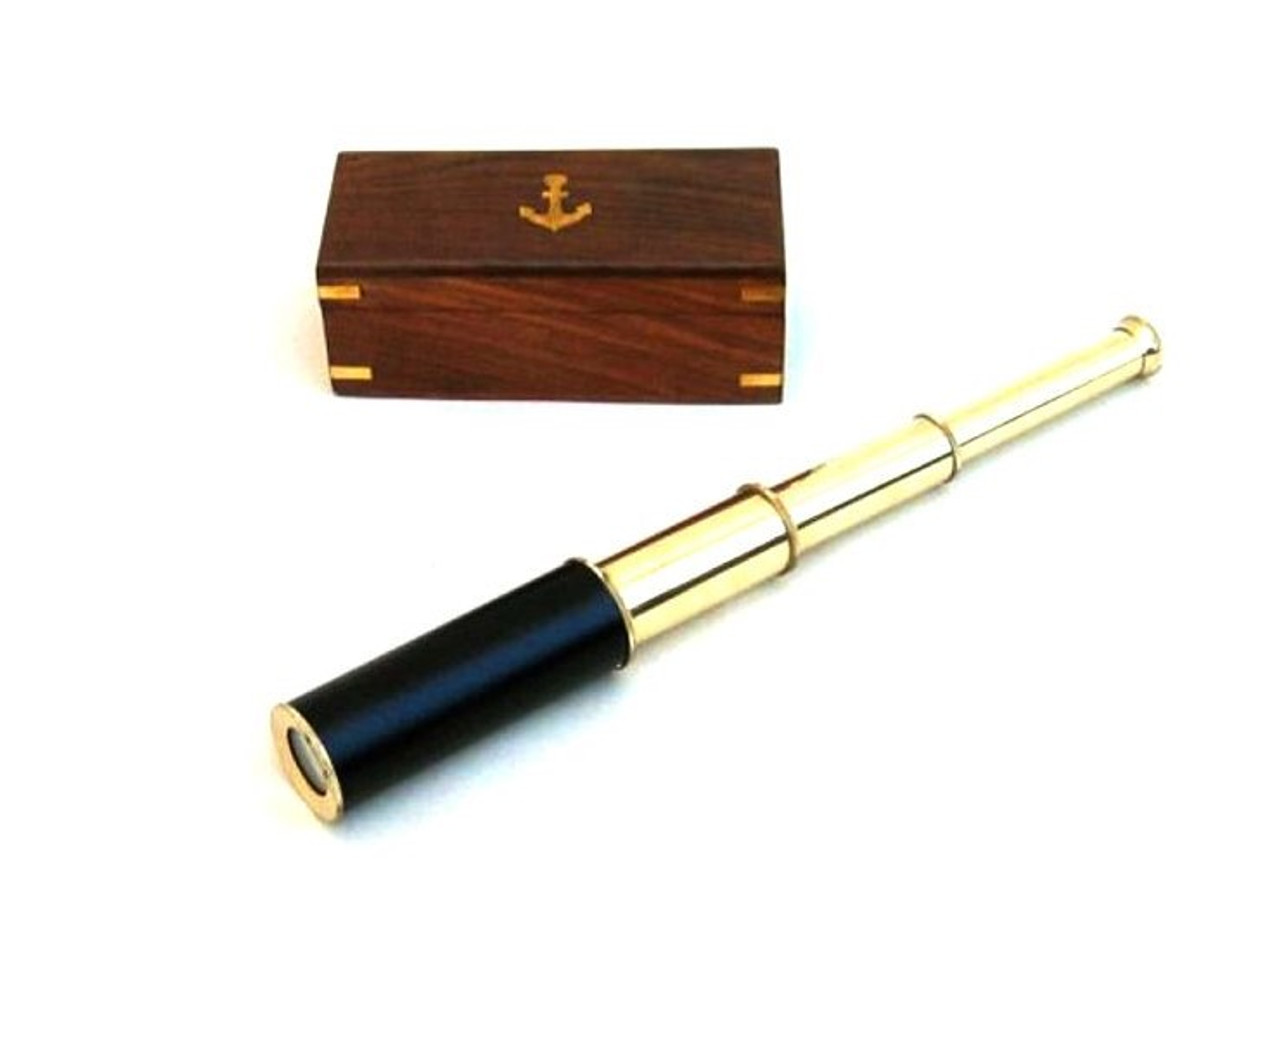 Pirate Spyglass with Leather Case 15 Solid Brass Hand Held Telescope 